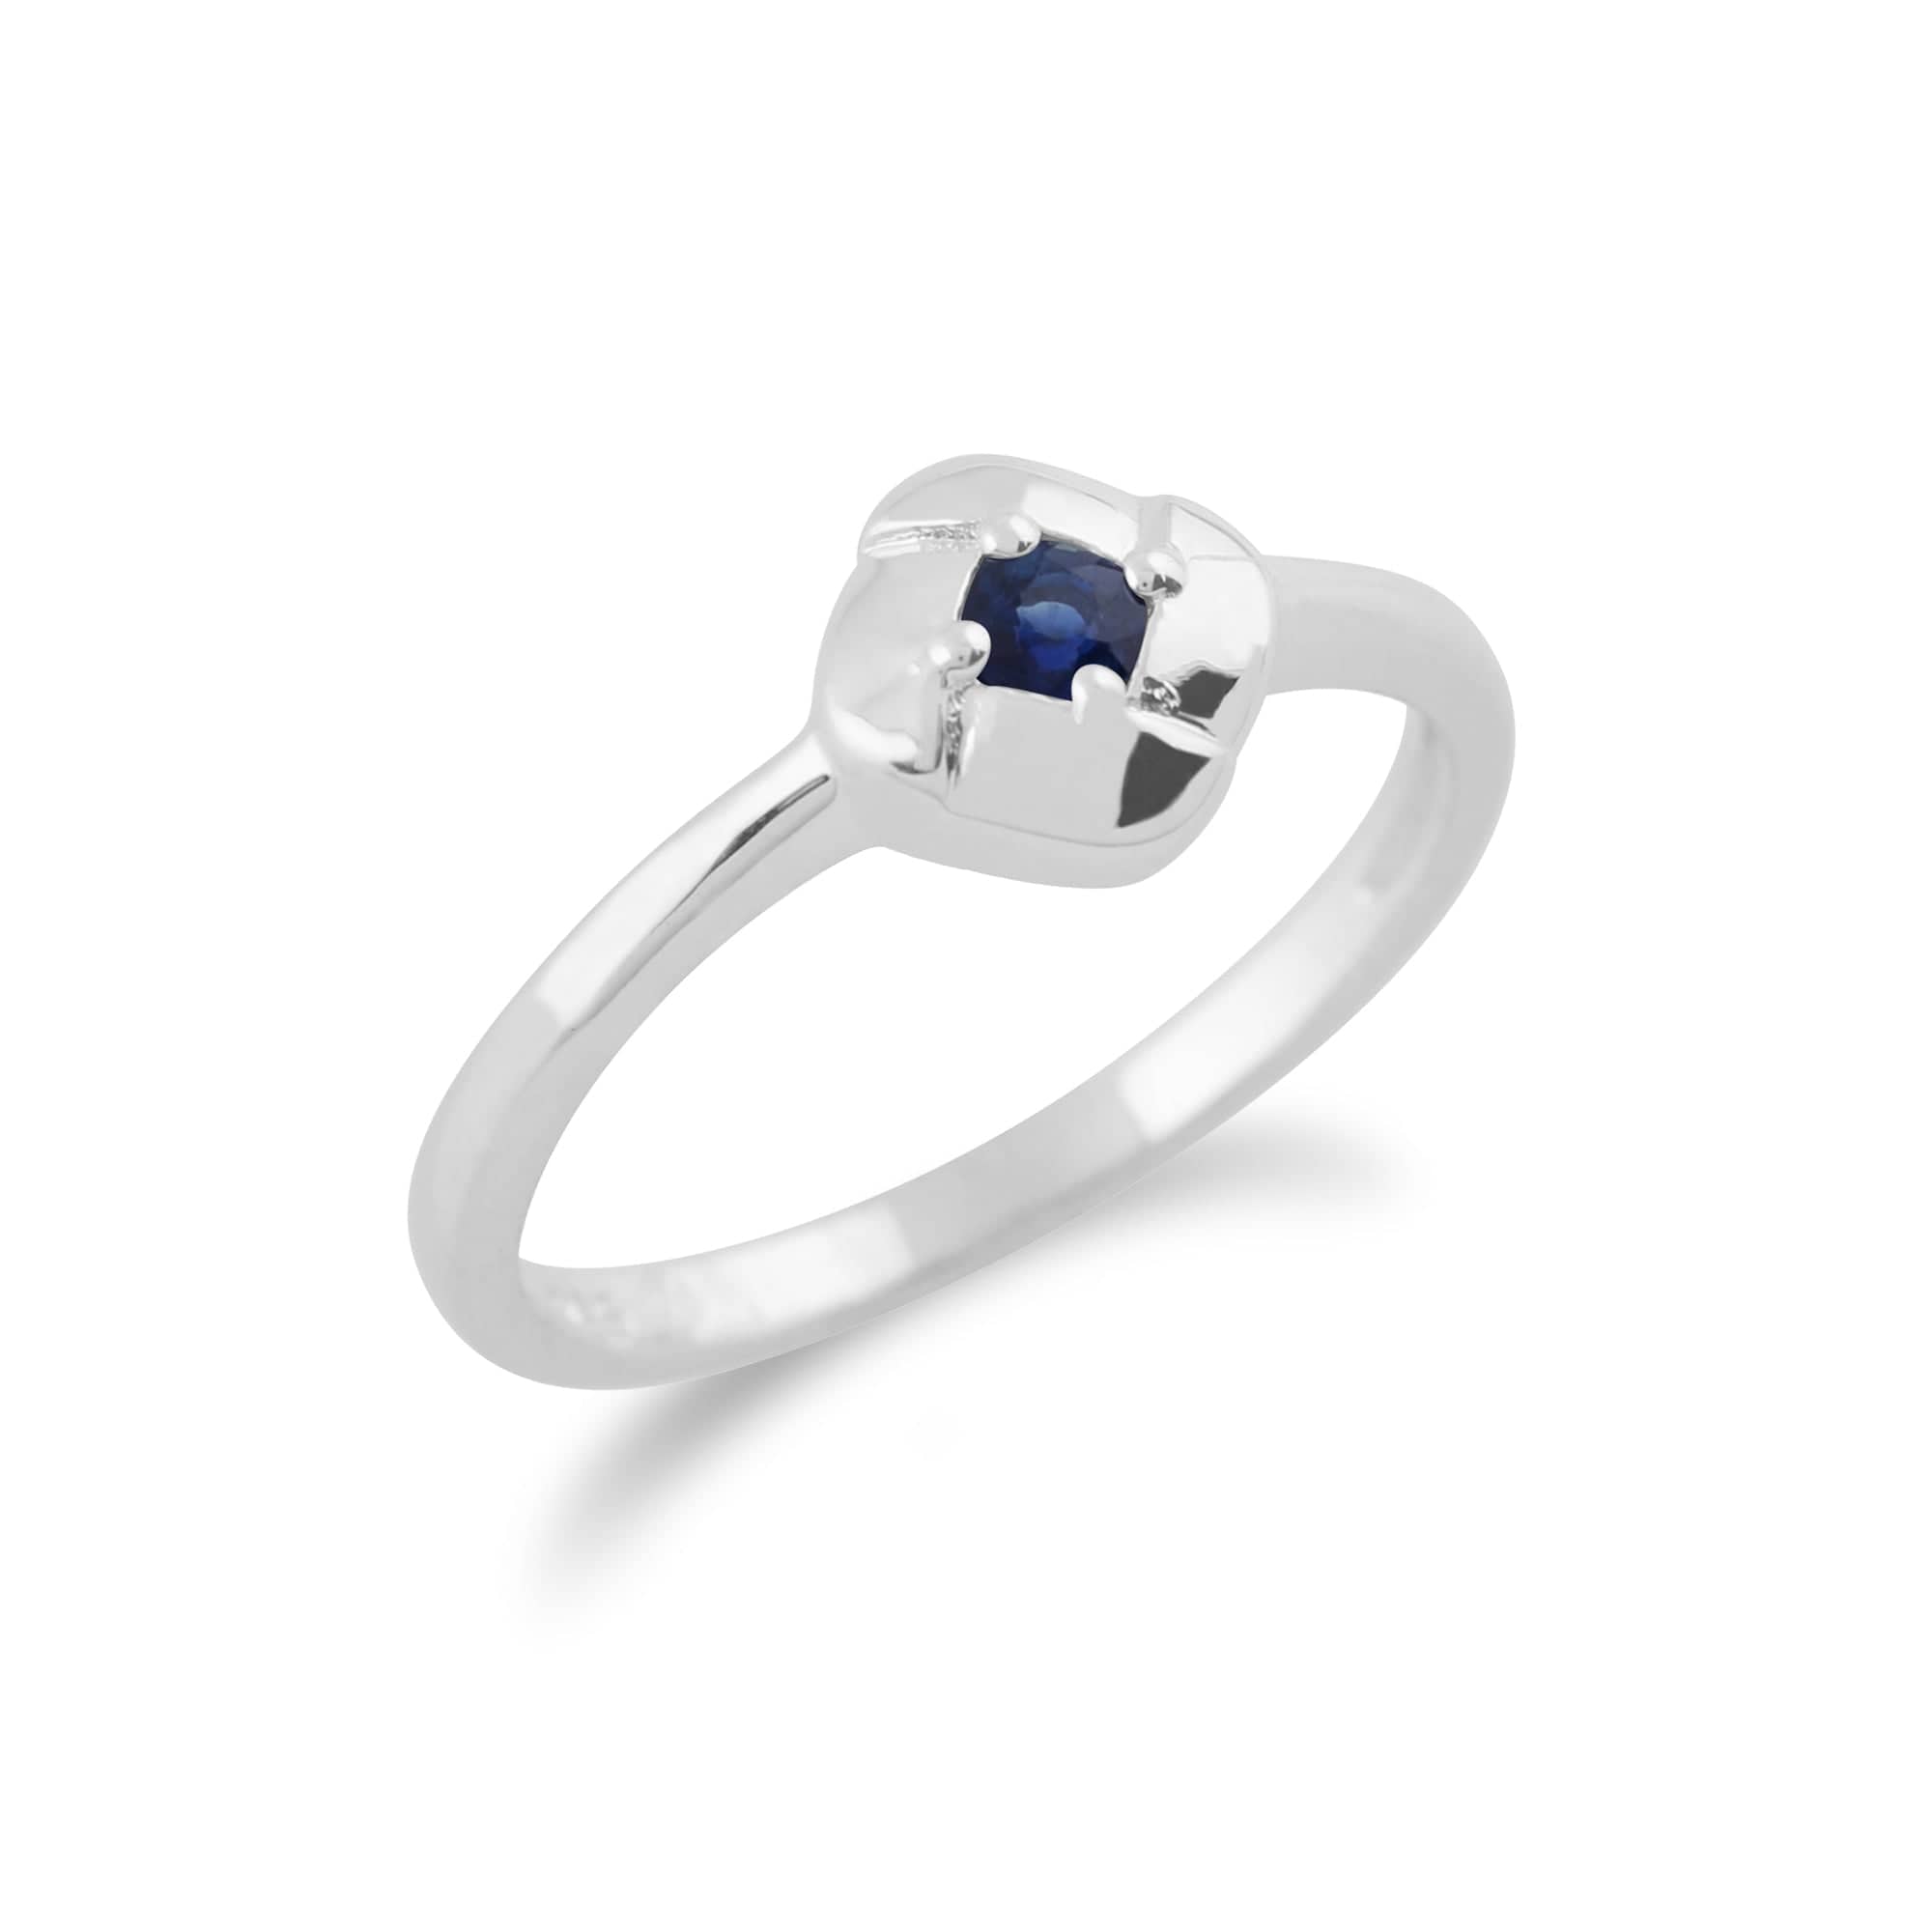 Gemondo 925 Sterling Silver 0.13ct Sapphire Square Crossover Ring